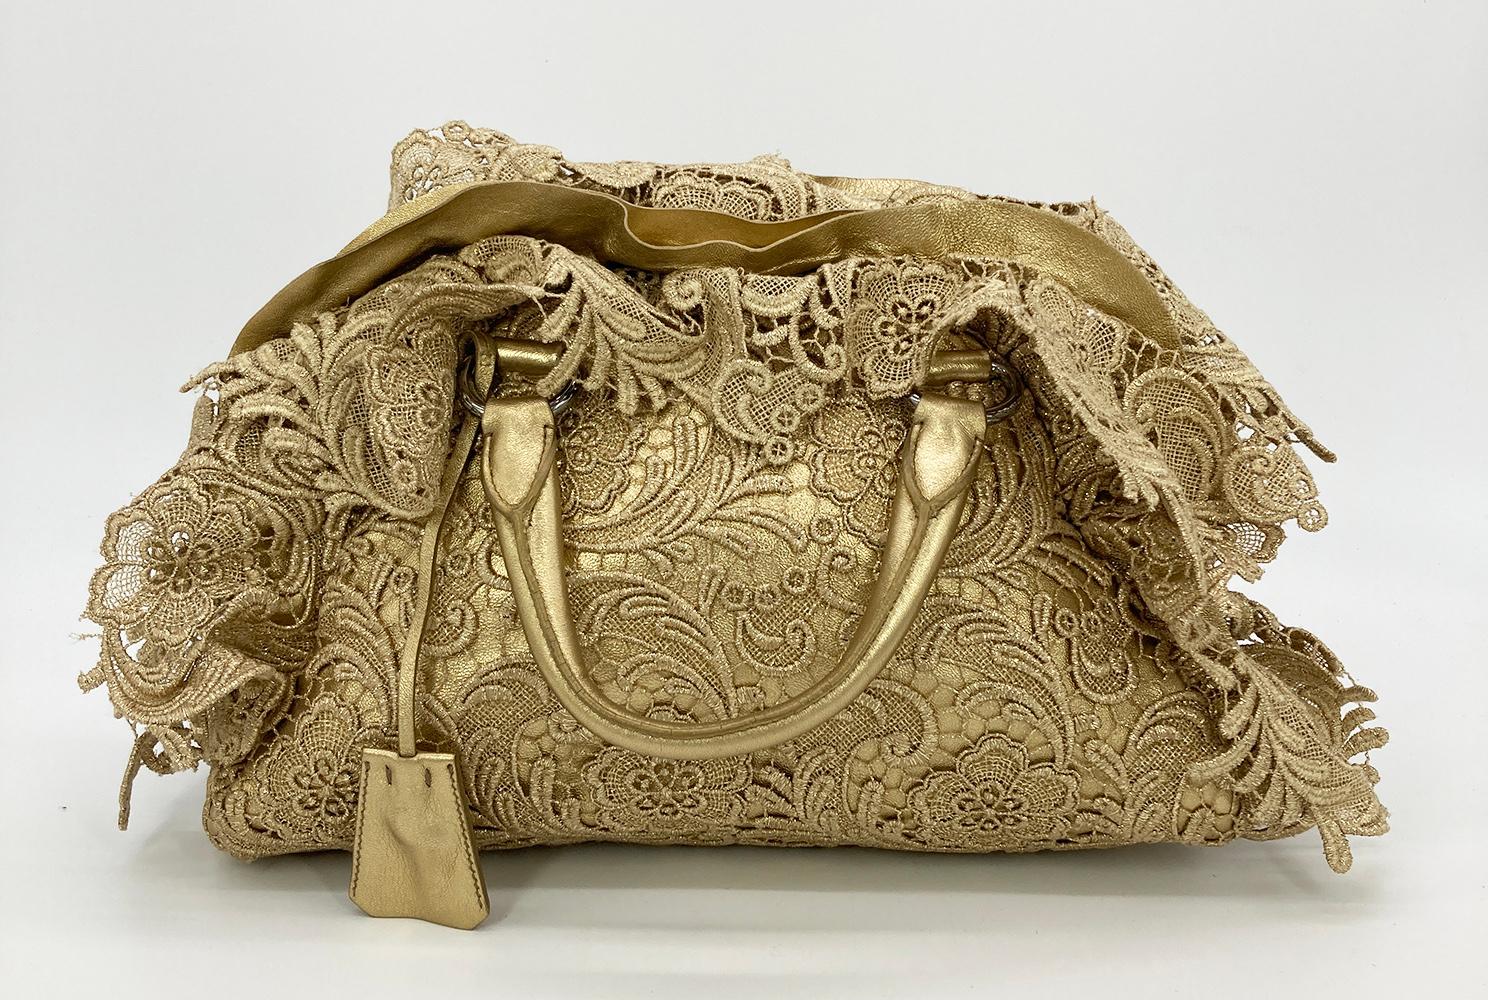 Prada Gold Leather and Lace Pizzo bag in excellent condition. Gold leather body with a gold lace overlay, gold leather trim details, and silver hardware. Top full zipper closure opens to a black nylon interior with one slit and one zipped side